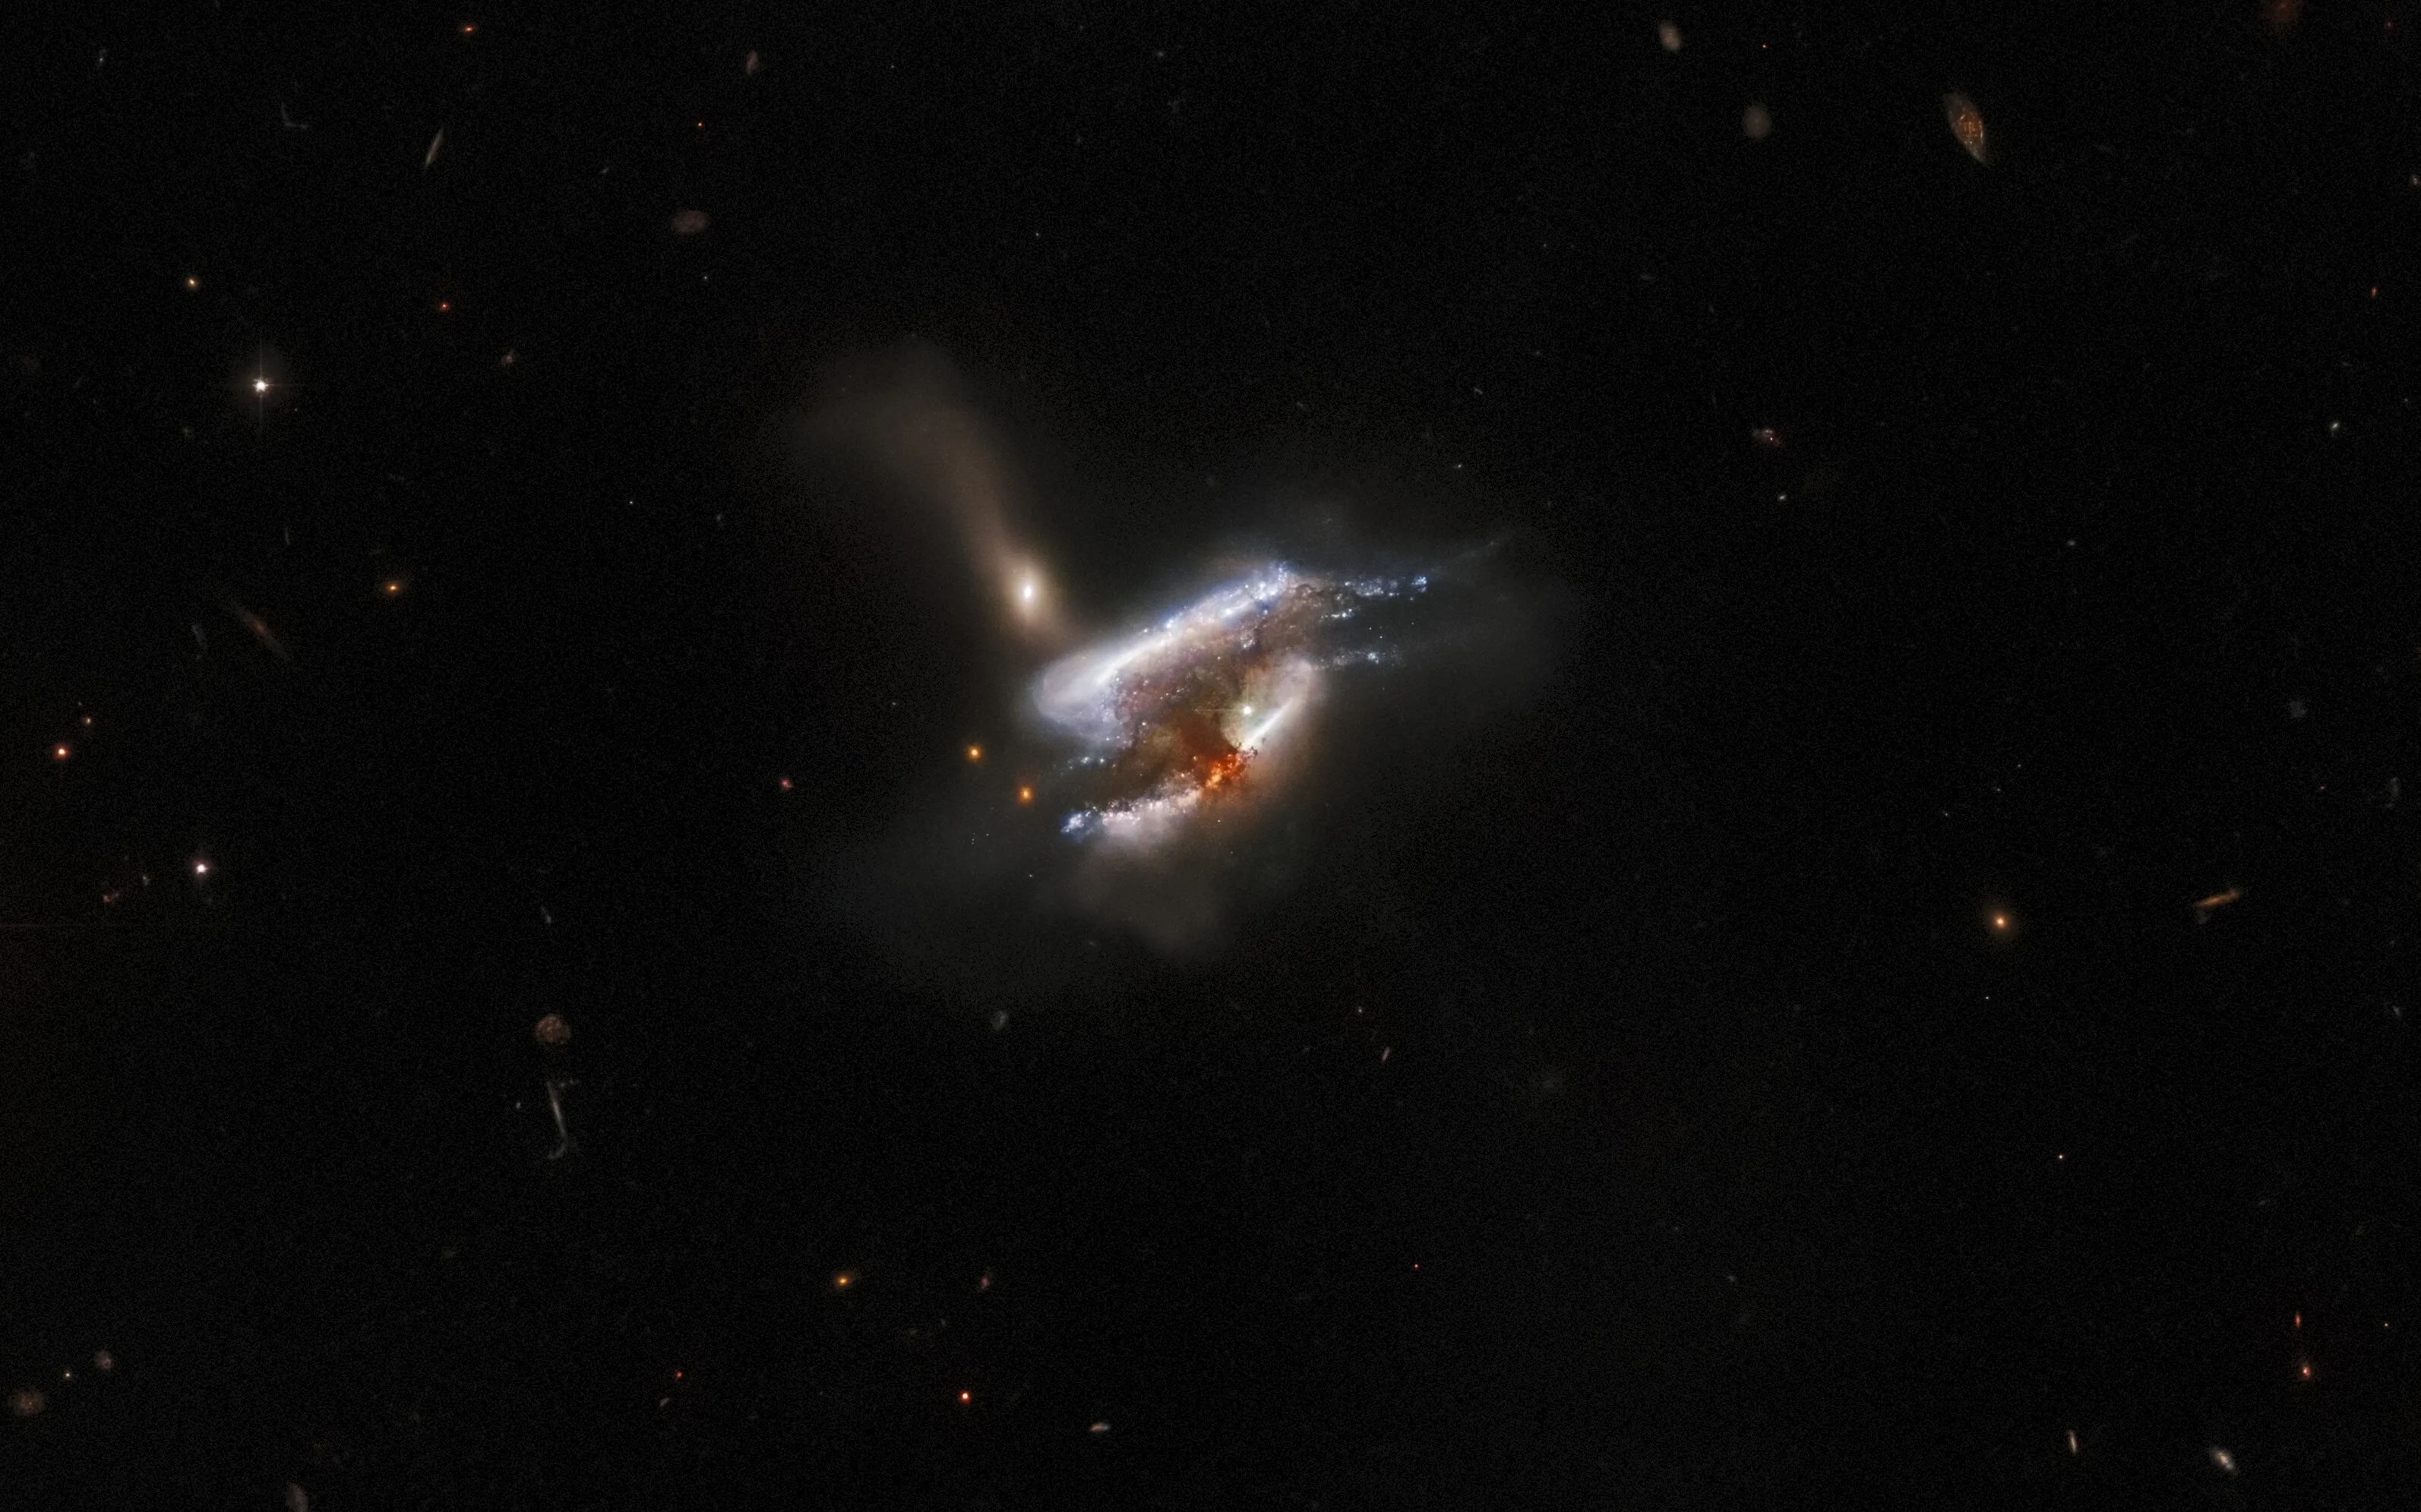 Three galaxies at center. two seen nearly edge on and angled from lower left to upper right, stacked one above the other. third galaxy perpendicular to the other two